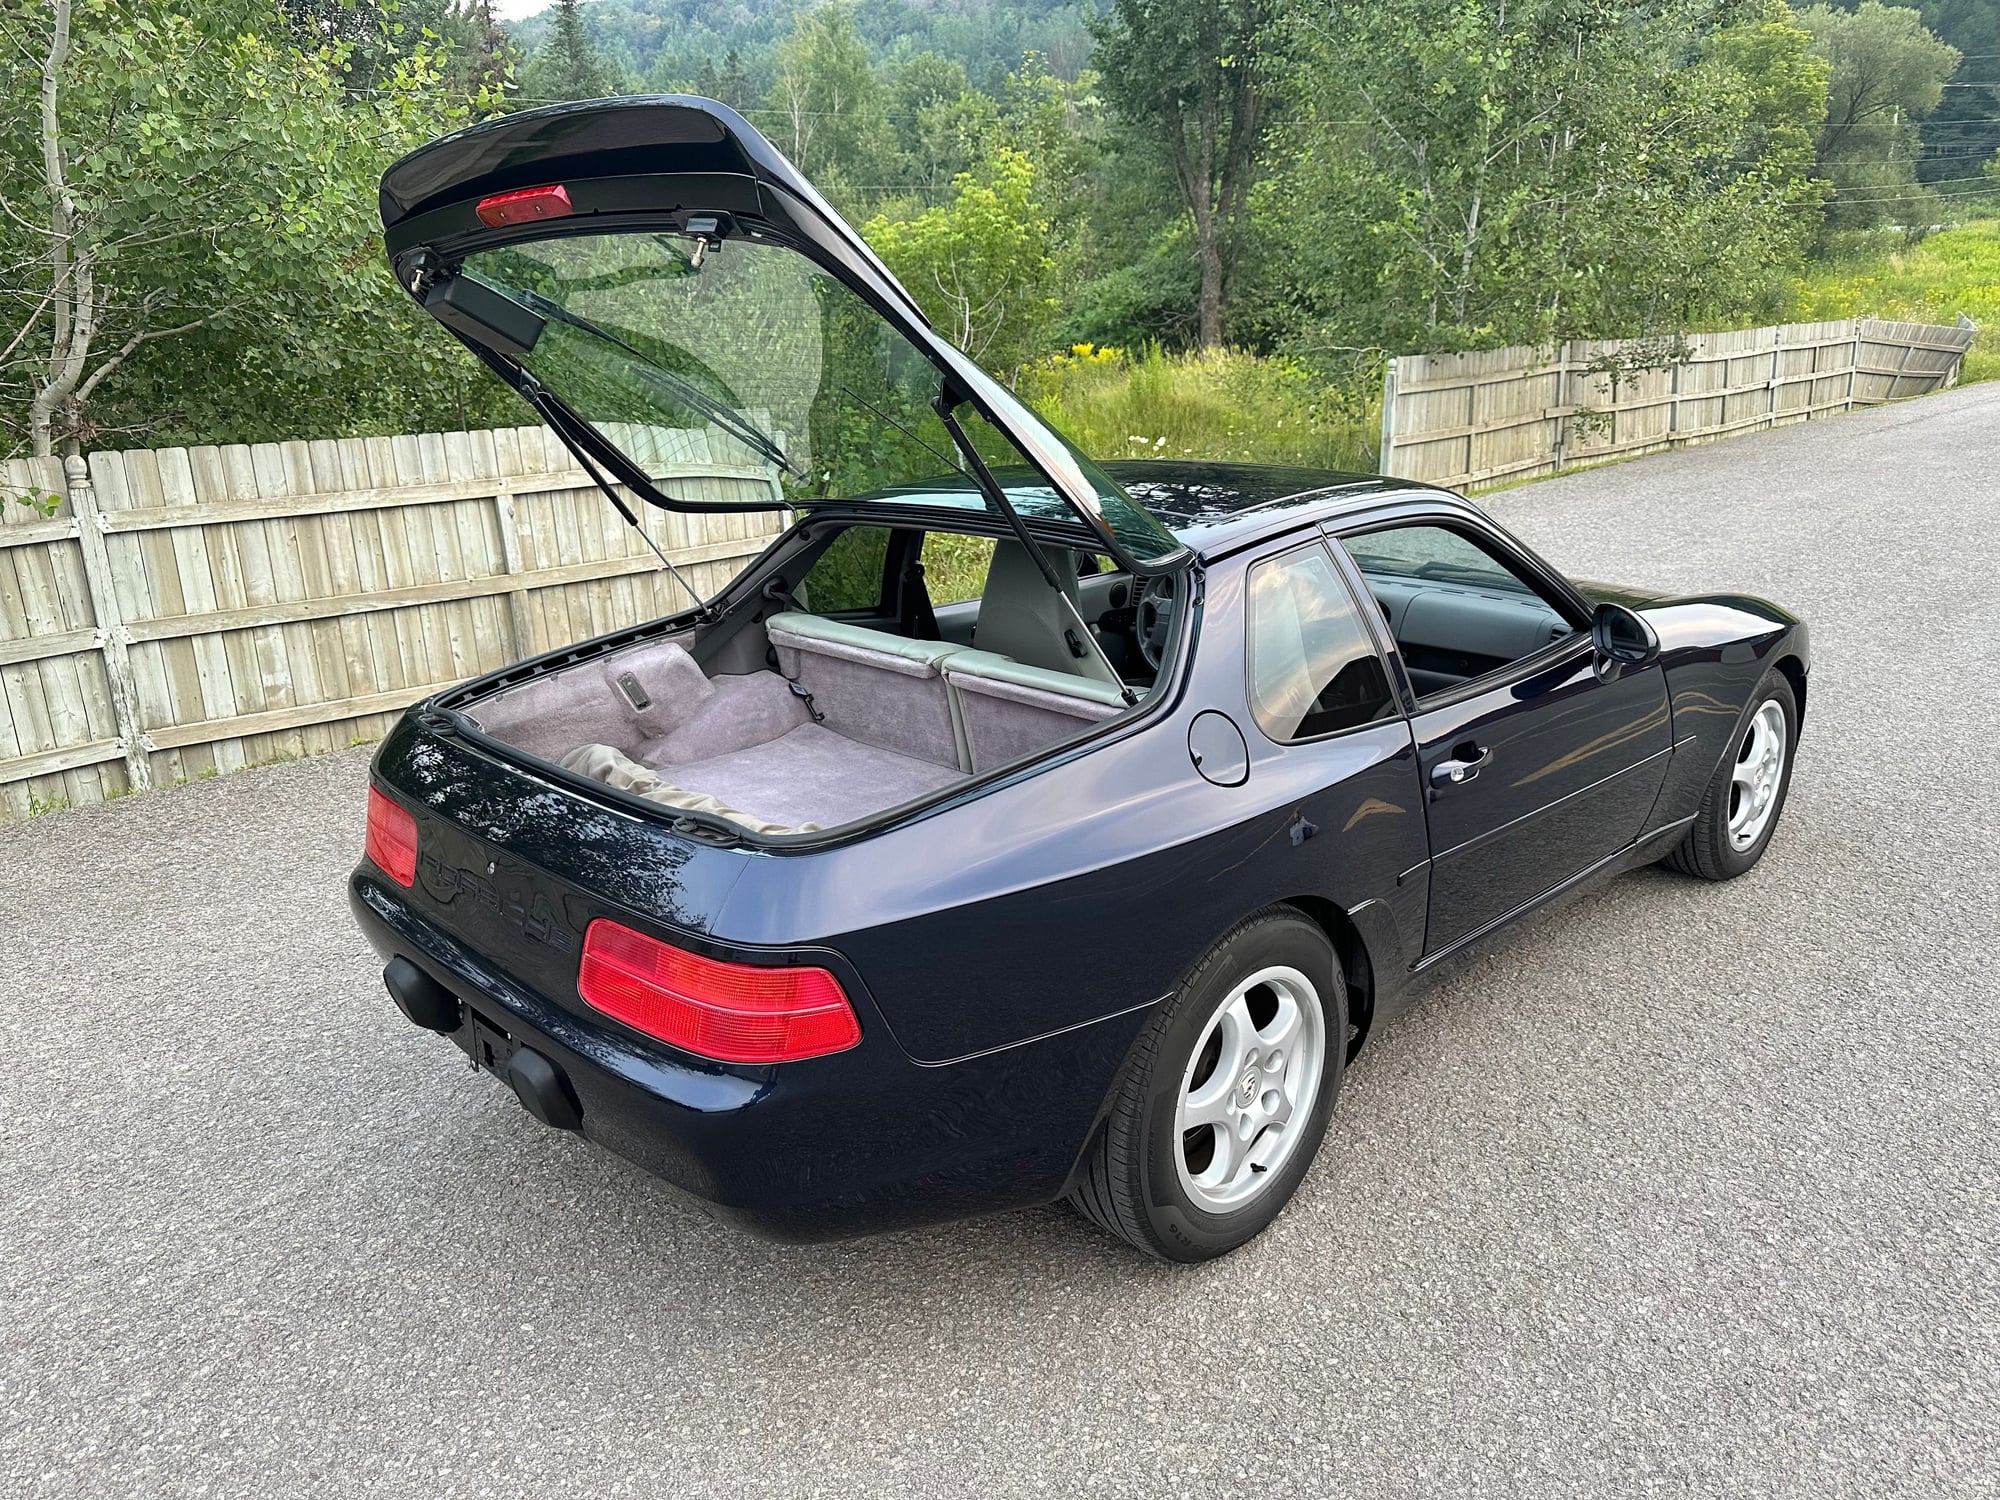 1994 Porsche 968 - 1994 Porsche 968 Coupe Manual - Used - VIN WP0AA2966RS820248 - 114,000 Miles - 4 cyl - 2WD - Manual - Coupe - Blue - Champlain, NY 12919, United States